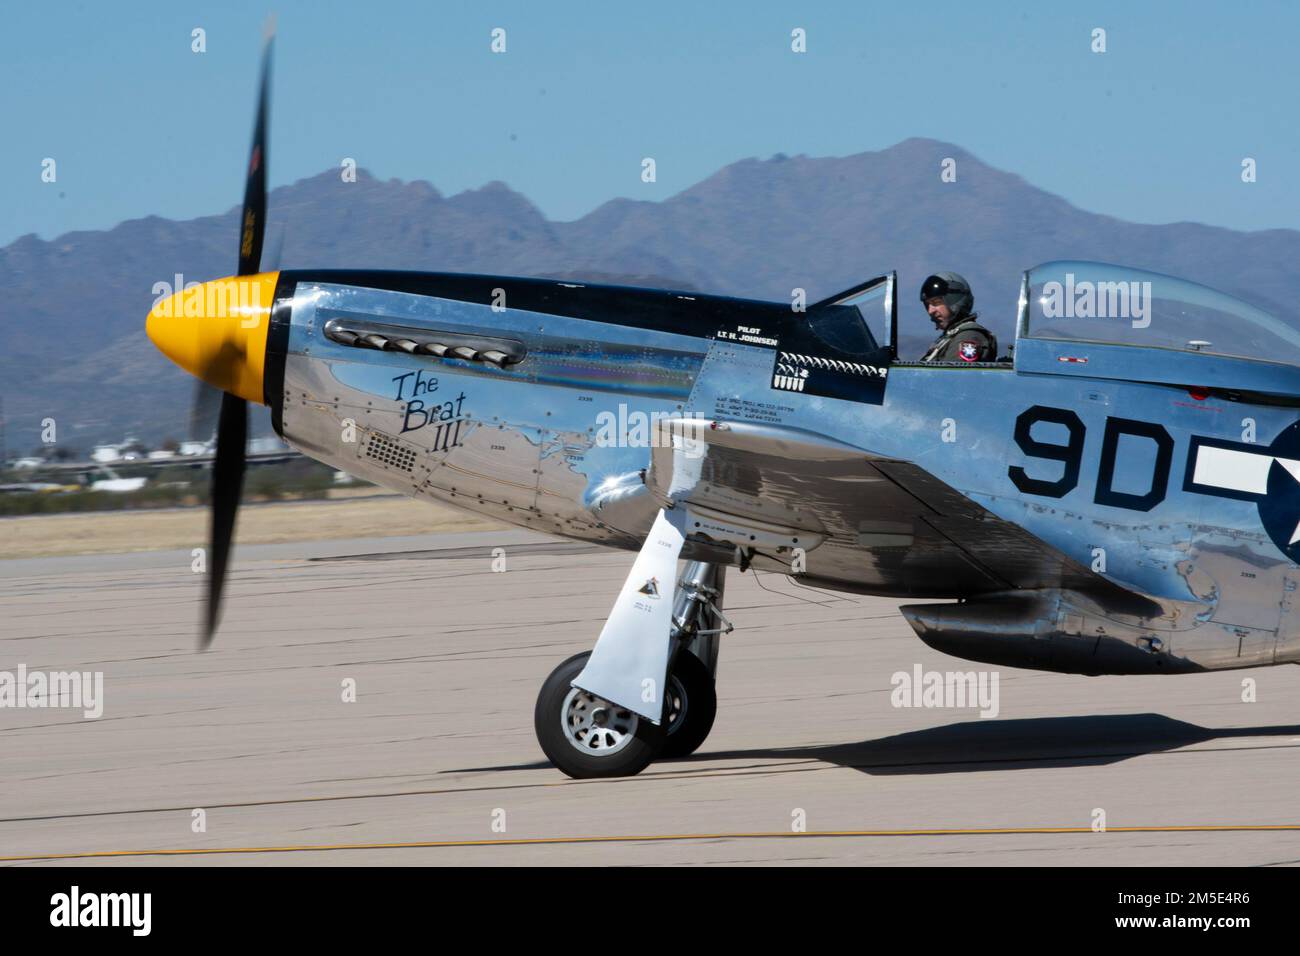 A P-51 Mustang taxies on the flightline in preparation for taking part in the Heritage Flight Training Course at Davis-Monthan Air Force Base, Arizona, March 6, 2022. This annual event provides the opportunity for civilian warbird pilots and current Air Force demonstration pilots to train together to prepare for the 2022 air show season. Stock Photo